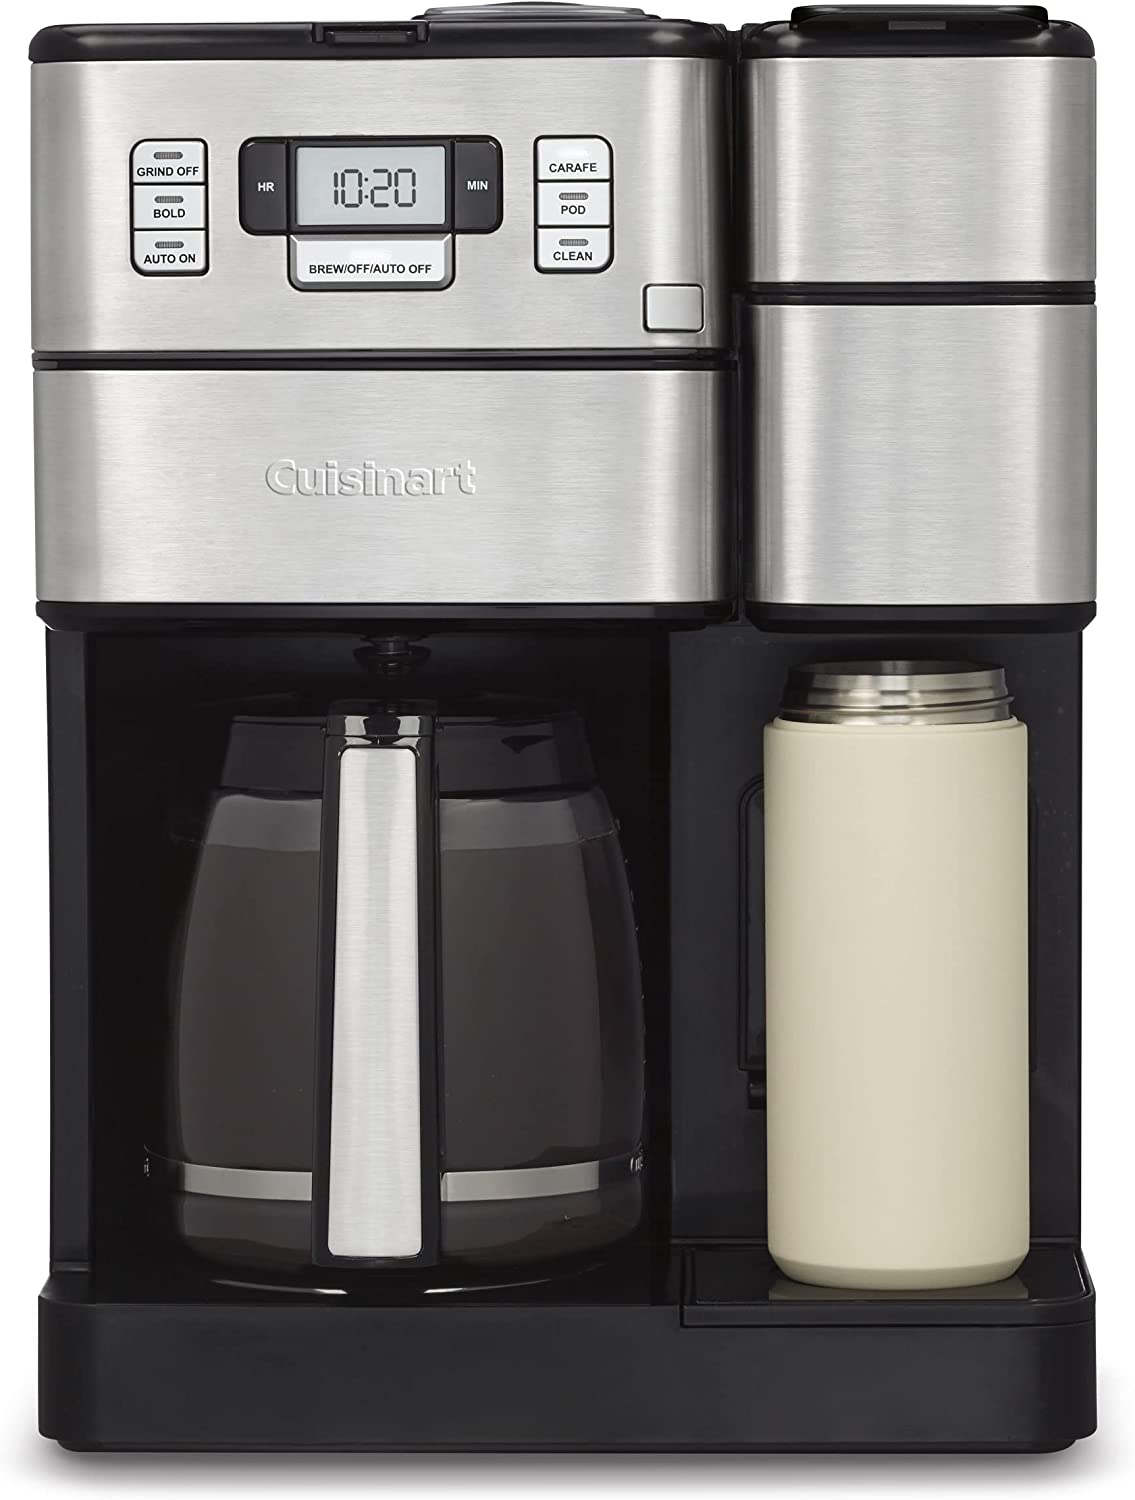 Cuisinart Dgb-400ssfr Grind And Brew 12 Cup Coffeemaker - Silver